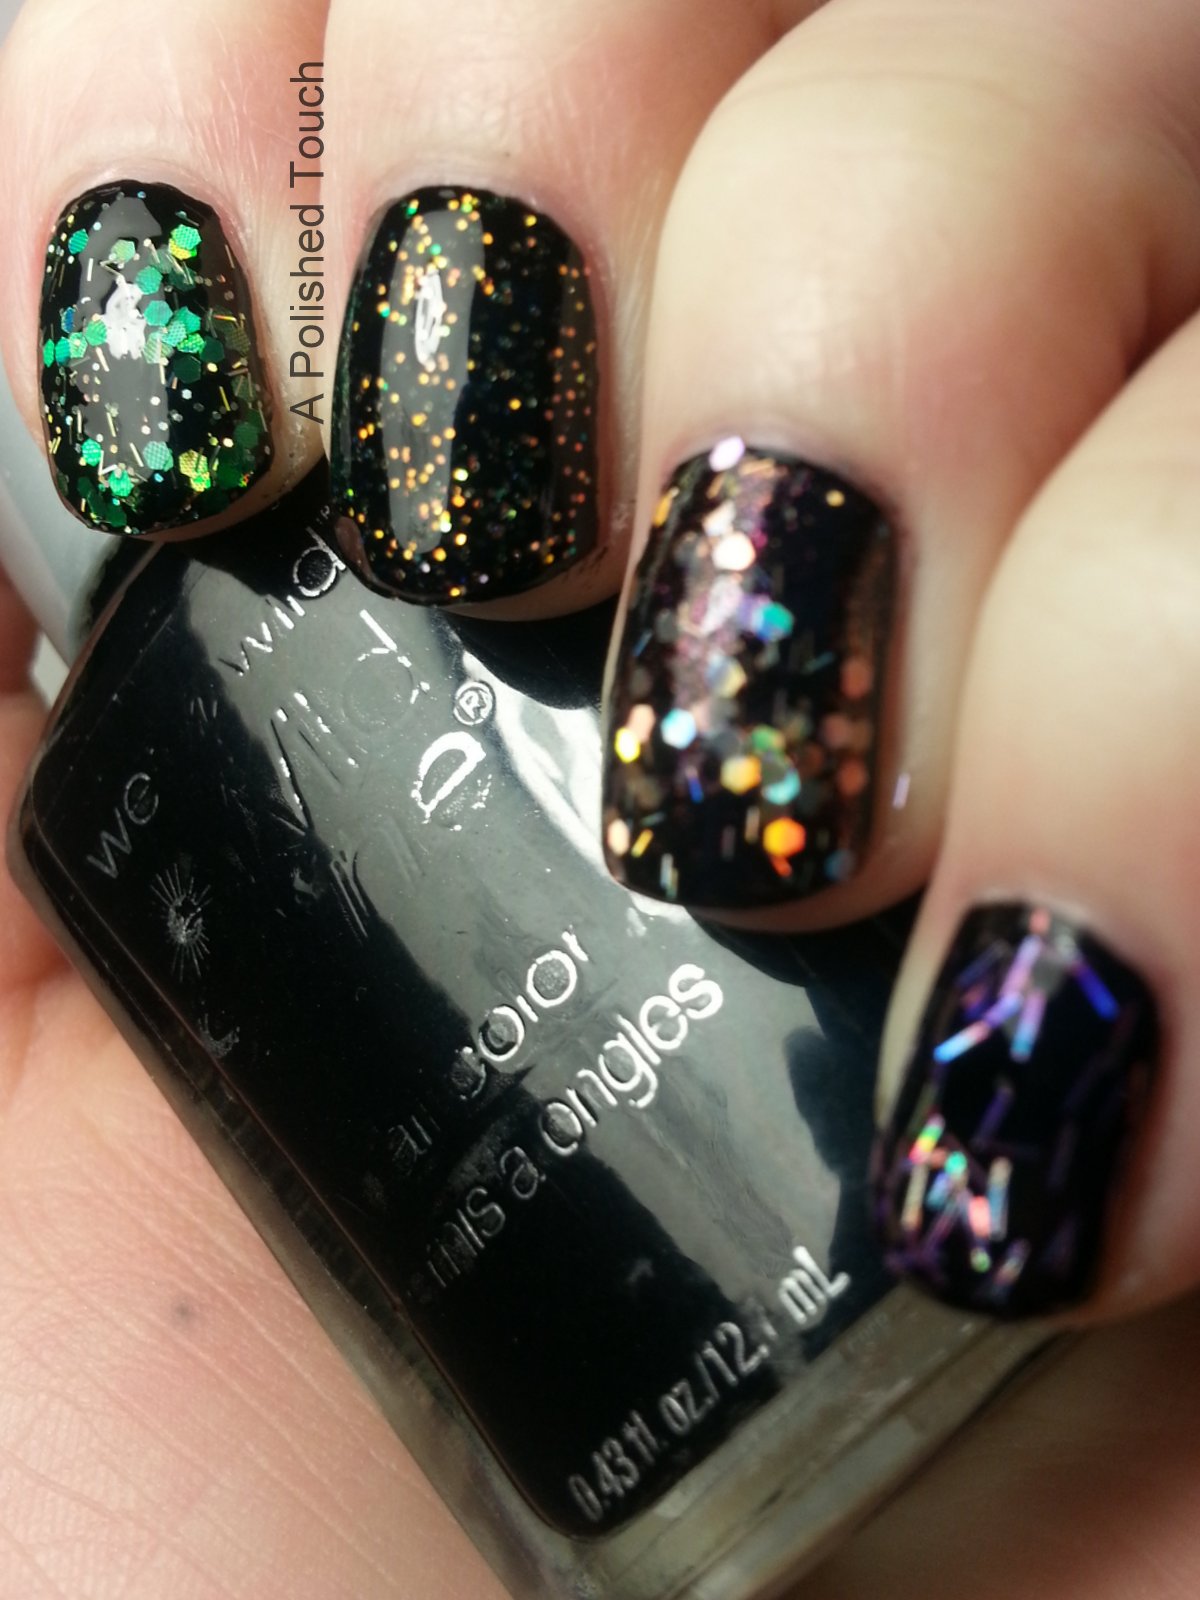 A Polished Touch: Orly Glitter Swatch Spam!